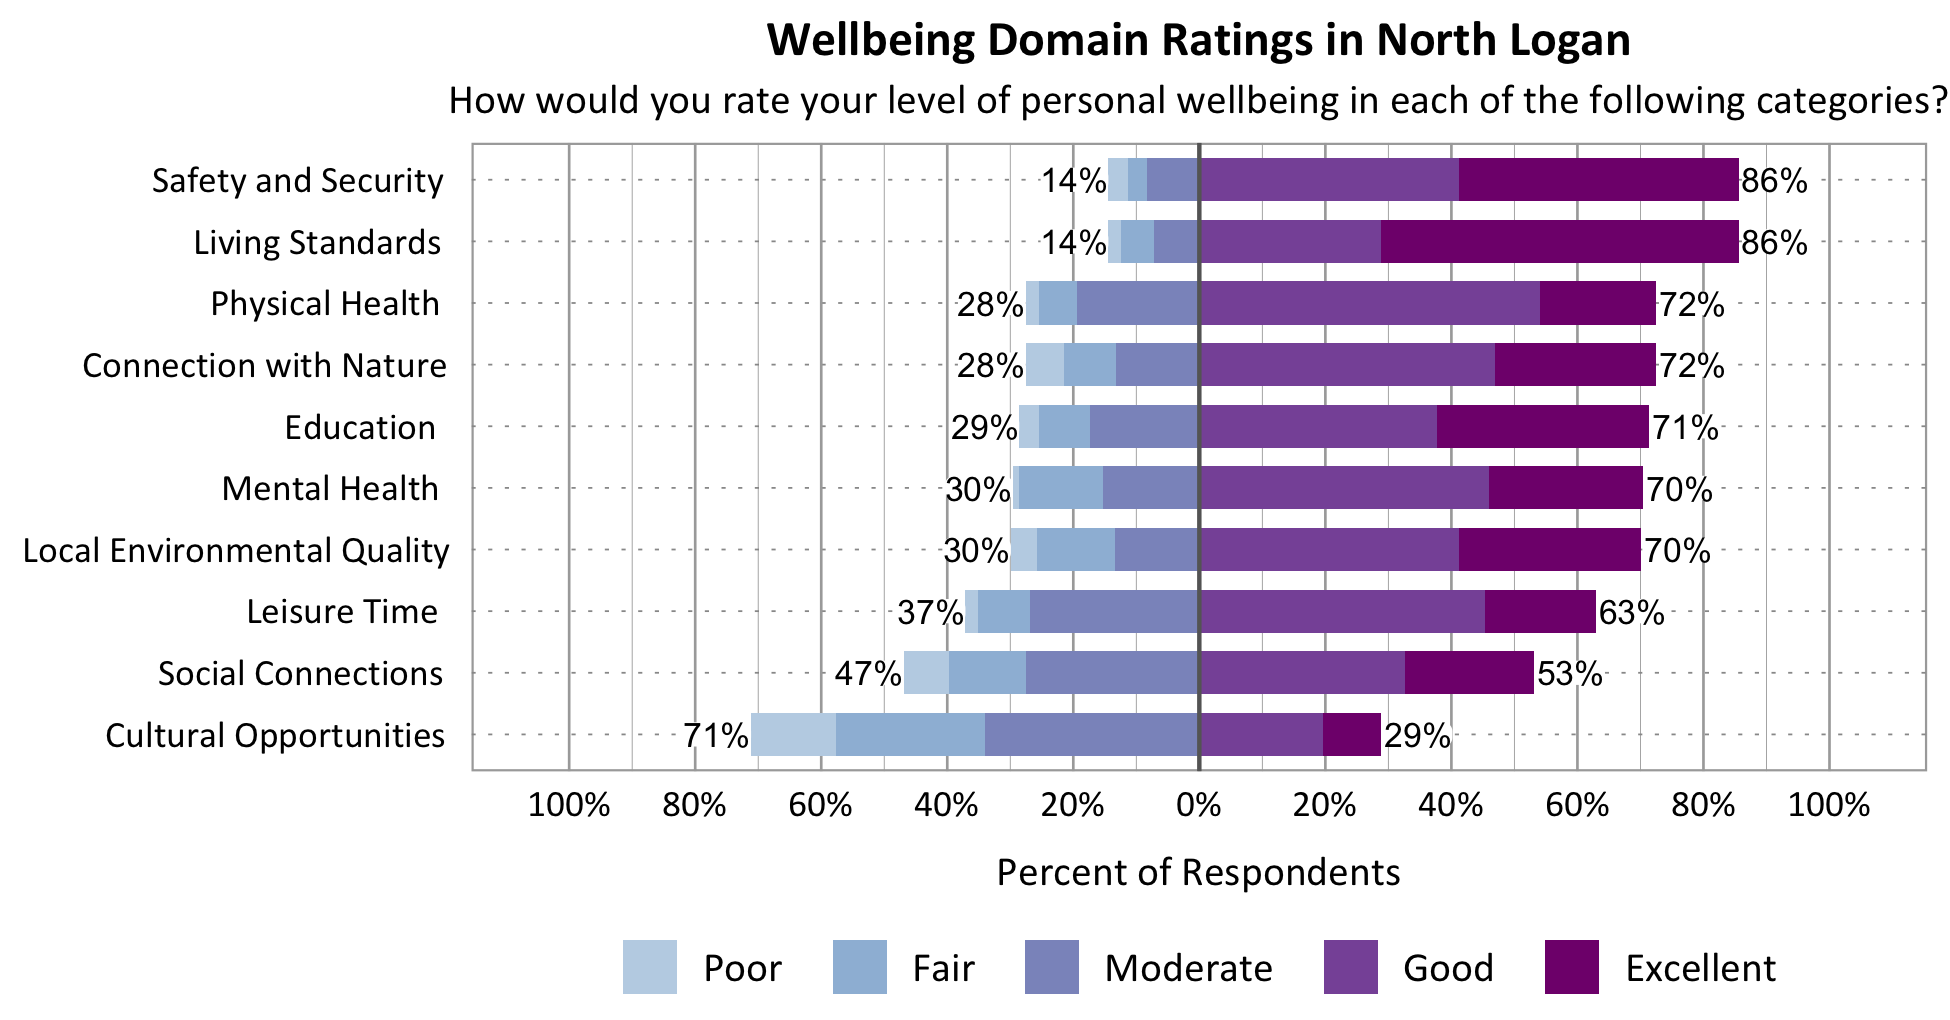 Likert Graph. Title: Wellbeing Domain Ratings in North Logan Subtitle: How would you rate your level of personal wellbeing in each of the following categories? Category: Safety and Security - 14% of respondents rated as poor, fair, or moderate while 86% rated as good or excellent; Category: Living Standards – 14% of respondents rated as poor, fair, or moderate while 86% rated as good or excellent; Category: Education - 29% of respondents rated as poor, fair, or moderate while 71% rated as good or excellent; Category: Connection with Nature - 28% of respondents rated as poor, fair, or moderate while 72% rated as good or excellent; Category: Mental Health - 30% of respondents rated as poor, fair, or moderate while 70% rated as good or excellent; Category: Local Environmental Quality - 30% of respondents rated as poor, fair, or moderate while 70% rated as good or excellent; Category: Physical Health - 28% of respondents rated as poor, fair, or moderate while 72% rated as good or excellent; Category: Leisure Time - 37% of respondents rated as poor, fair or moderate while 63% rated as good or excellent; Category: Social Connections - 47% of respondents rated as poor, fair, or moderate while 53% rated as good or excellent; Category: Cultural Opportunities - 71% of respondents rated as poor, fair or moderate while 29% rated as good or excellent.